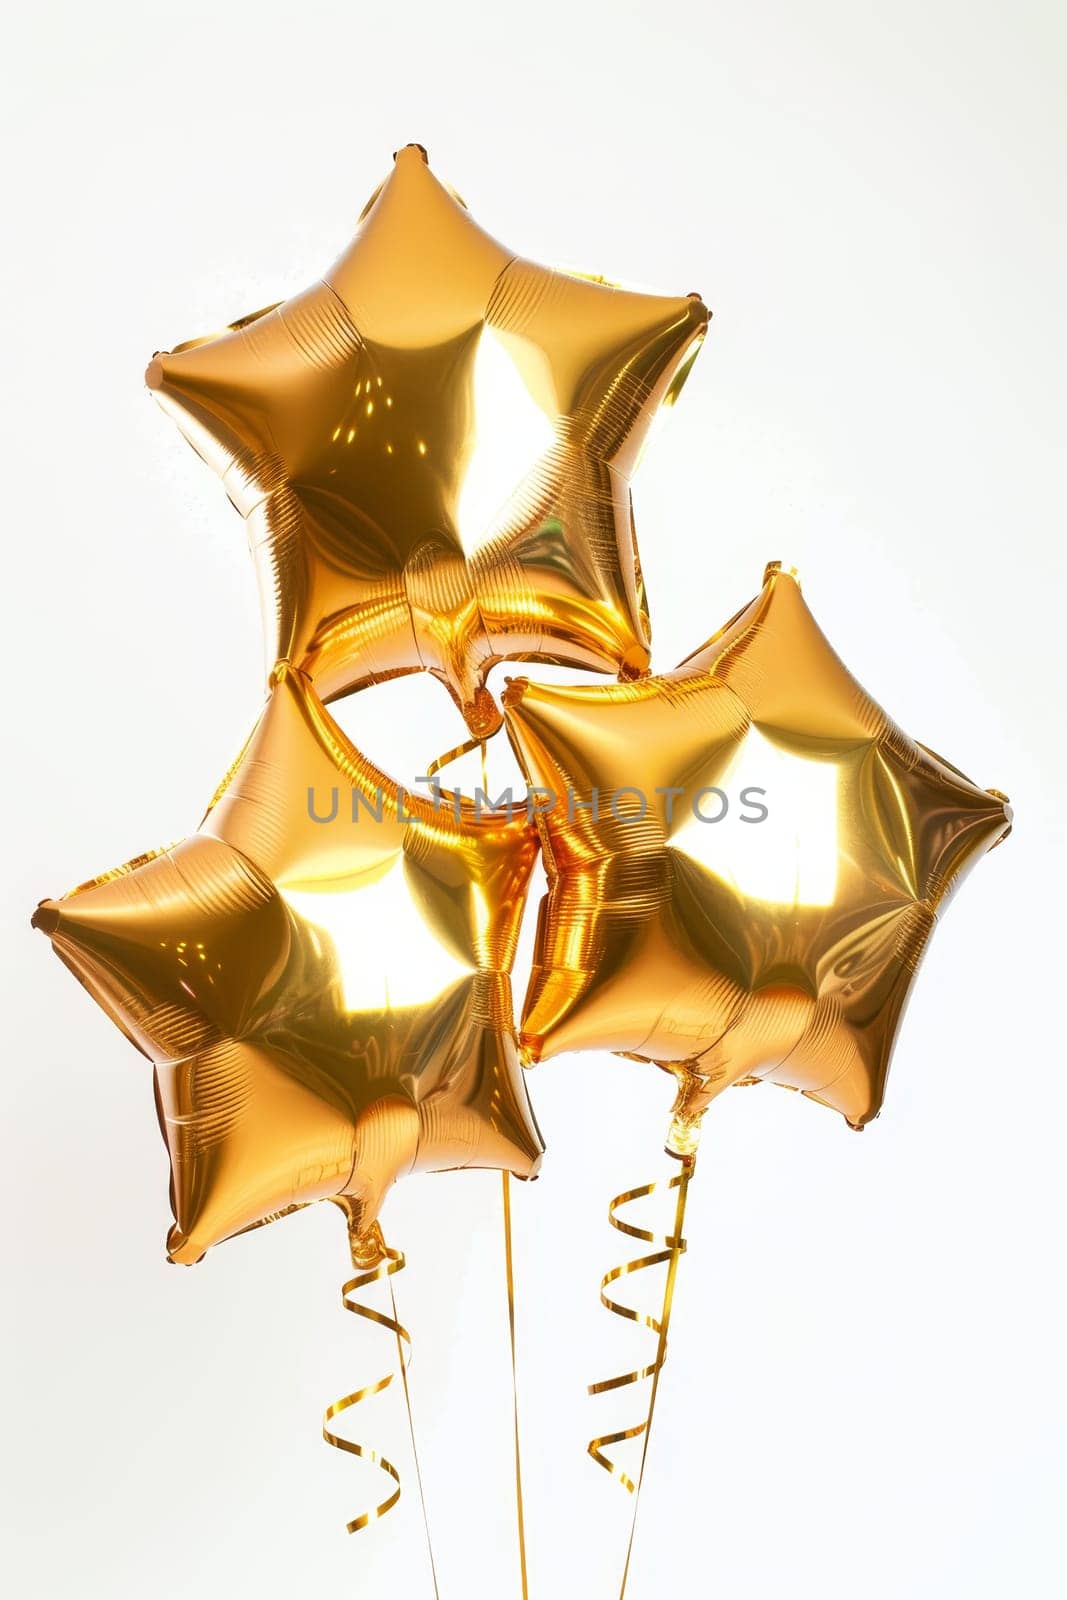 A bunch of shiny golden star-shaped balloons with festive ribbons on a white background. by sfinks